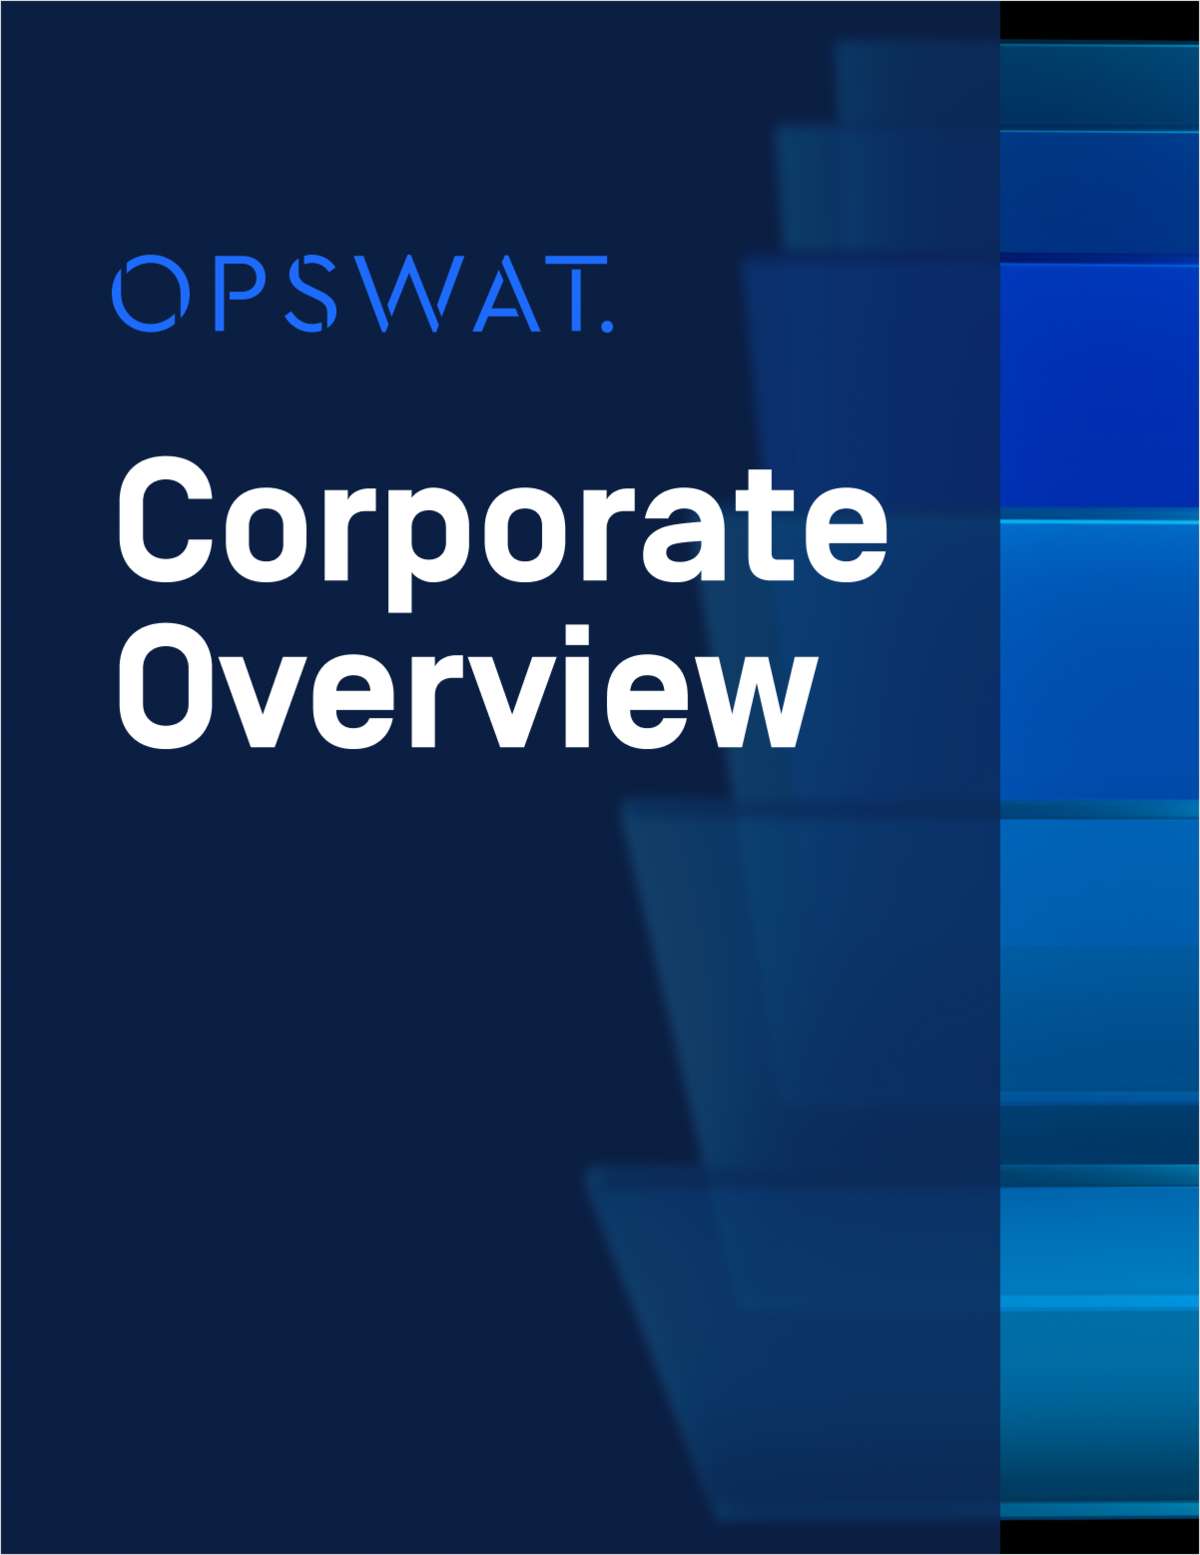 OPSWAT Company Overview One Sheet